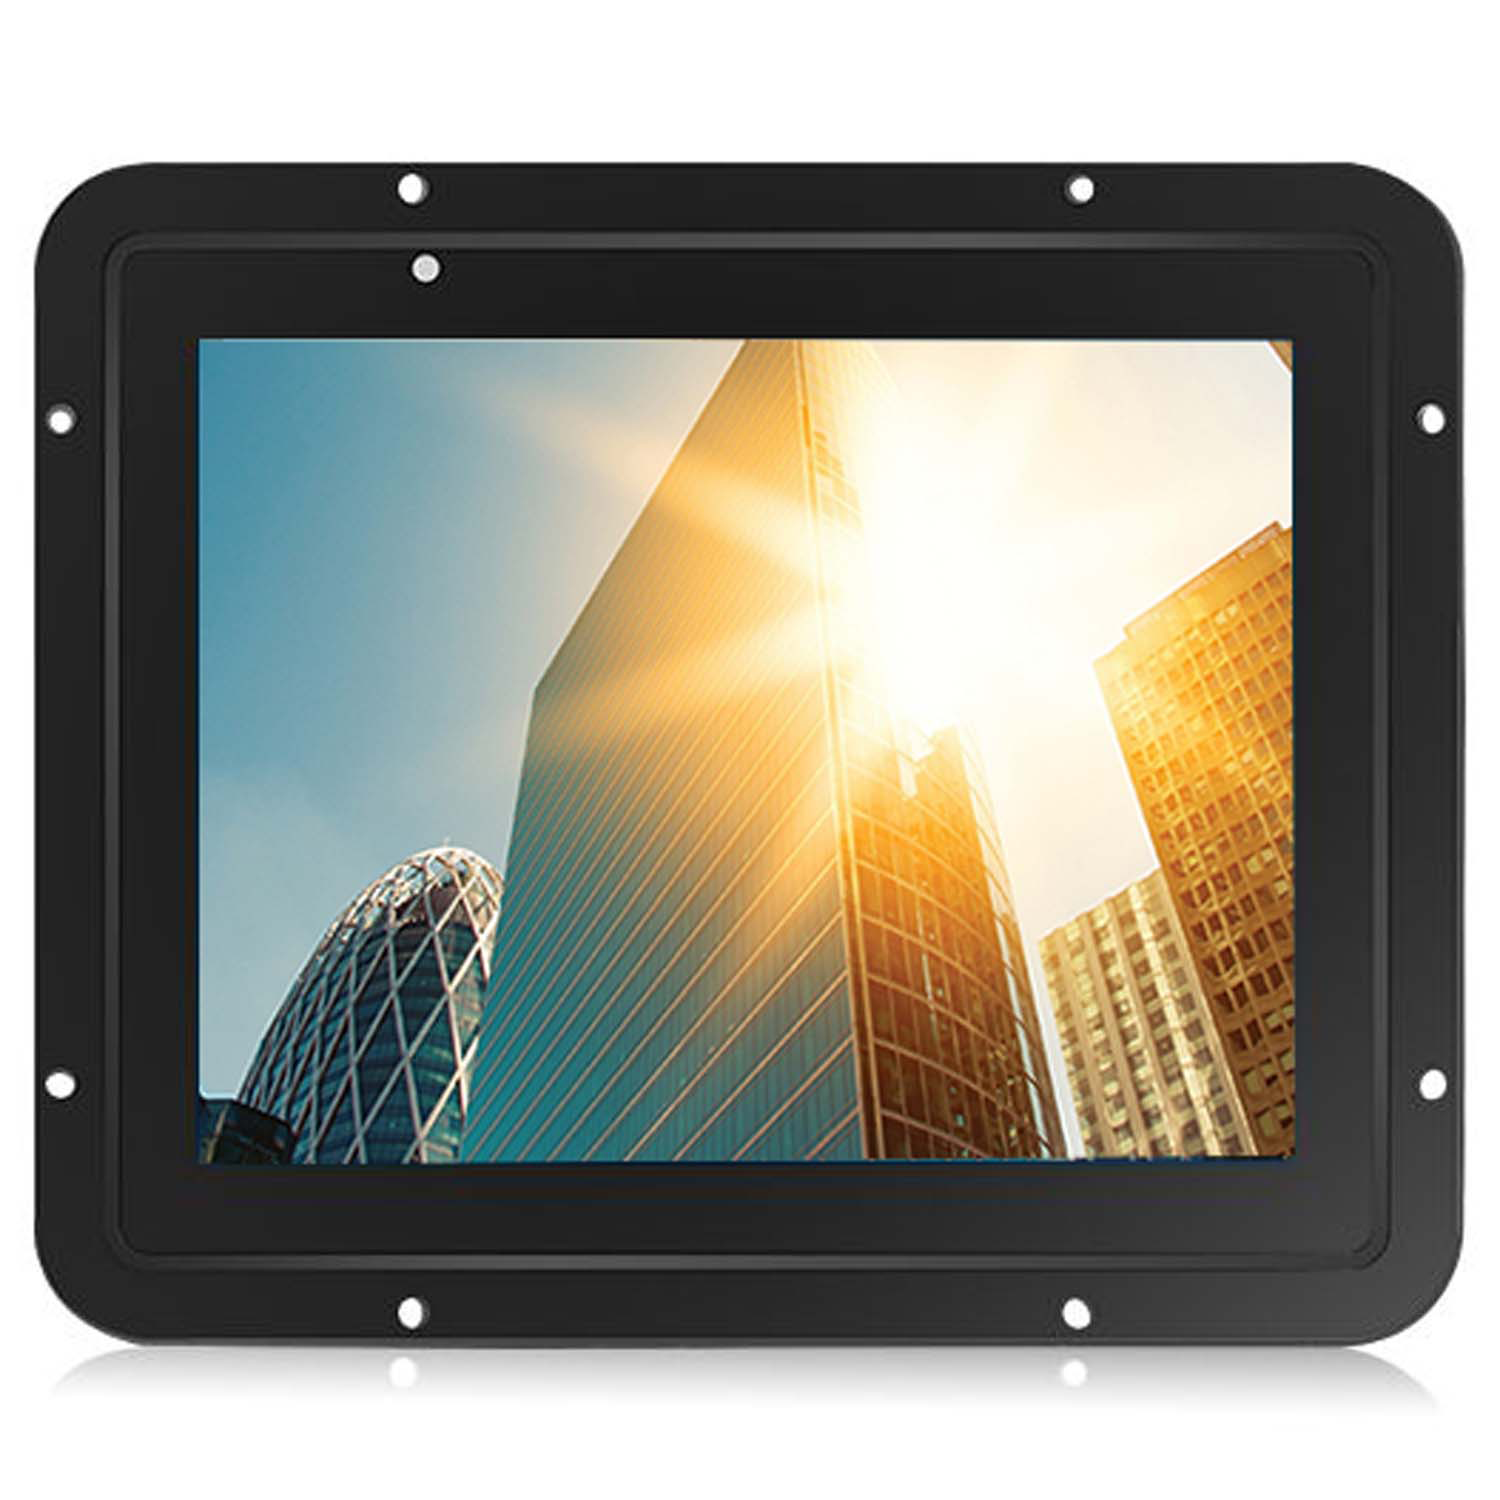 INDUSTRIAL OPEN FRAME HIGH BRIGHT TOUCH MONITOR KEETOUCH 8’’ KT-008-CHWS0M1